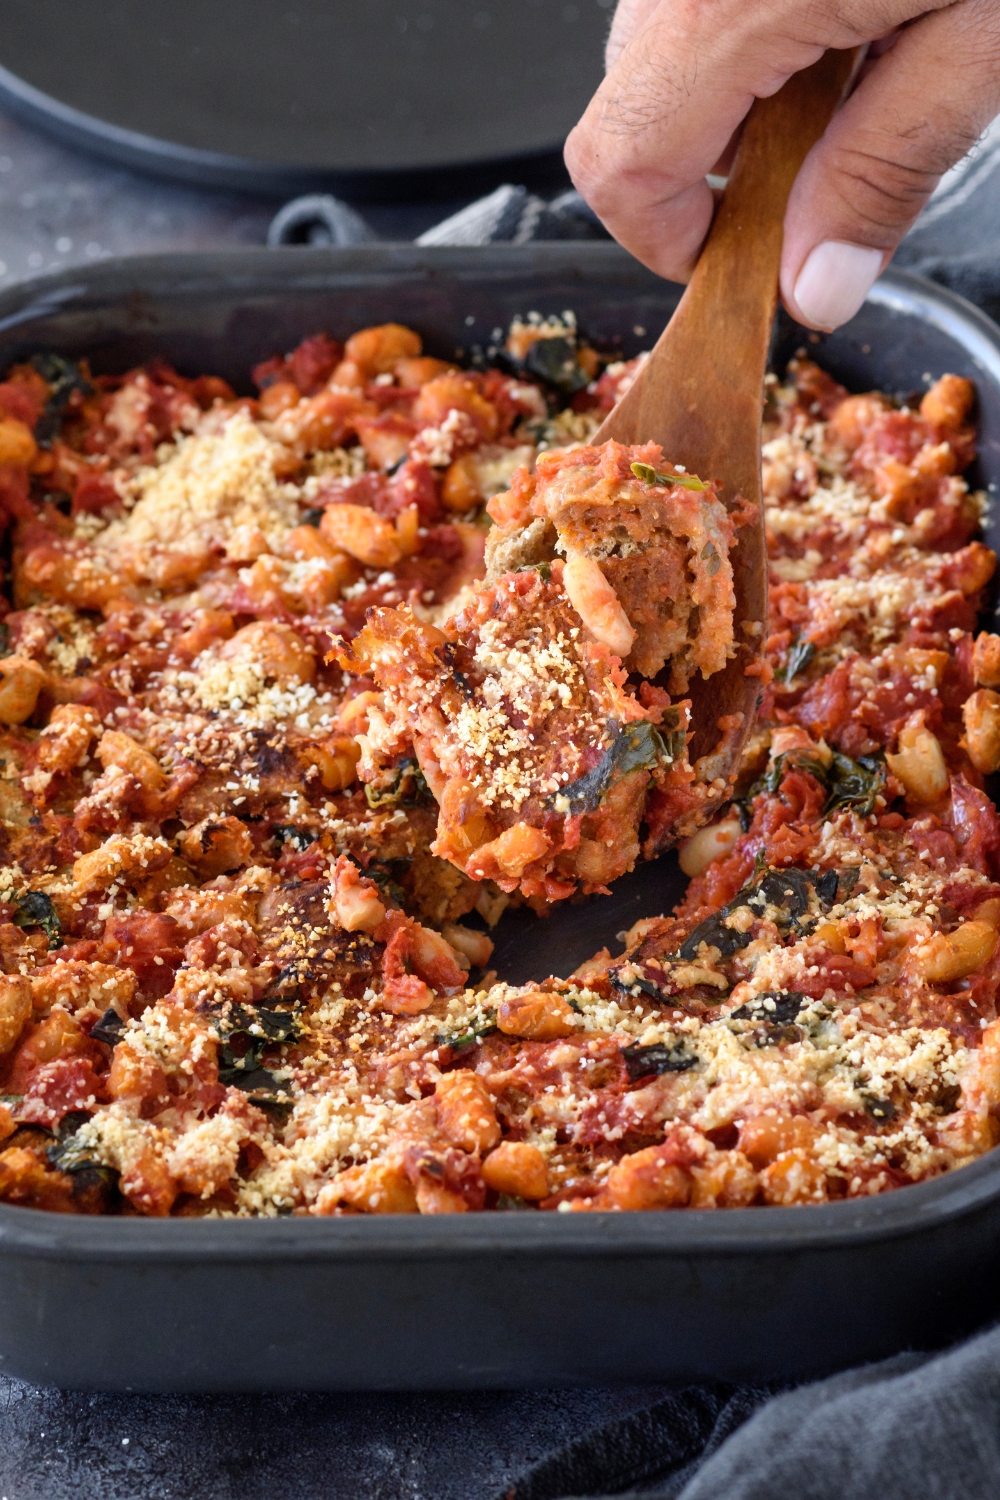 A hand scooping a serving of tomato casserole out of the baking dish using a wooden spoon.